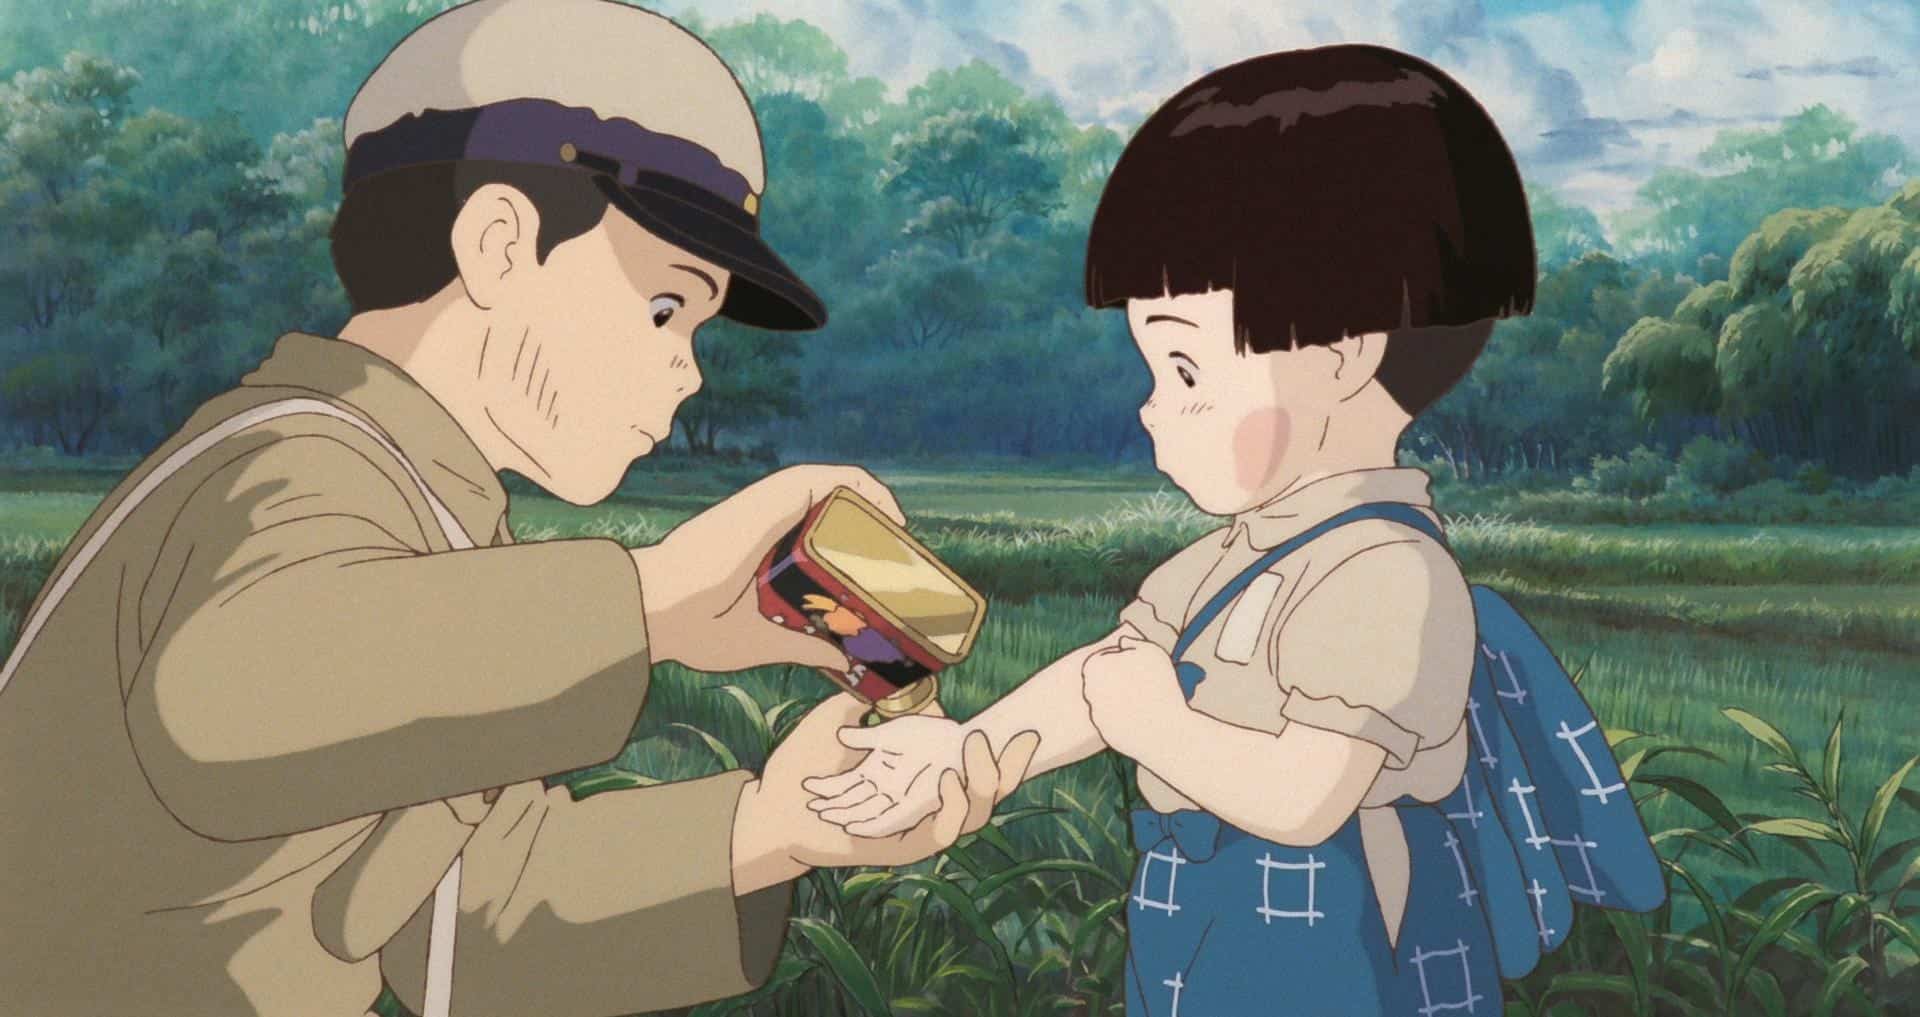 An animated young soldier helping his little sister in this image from Studio Ghibli.